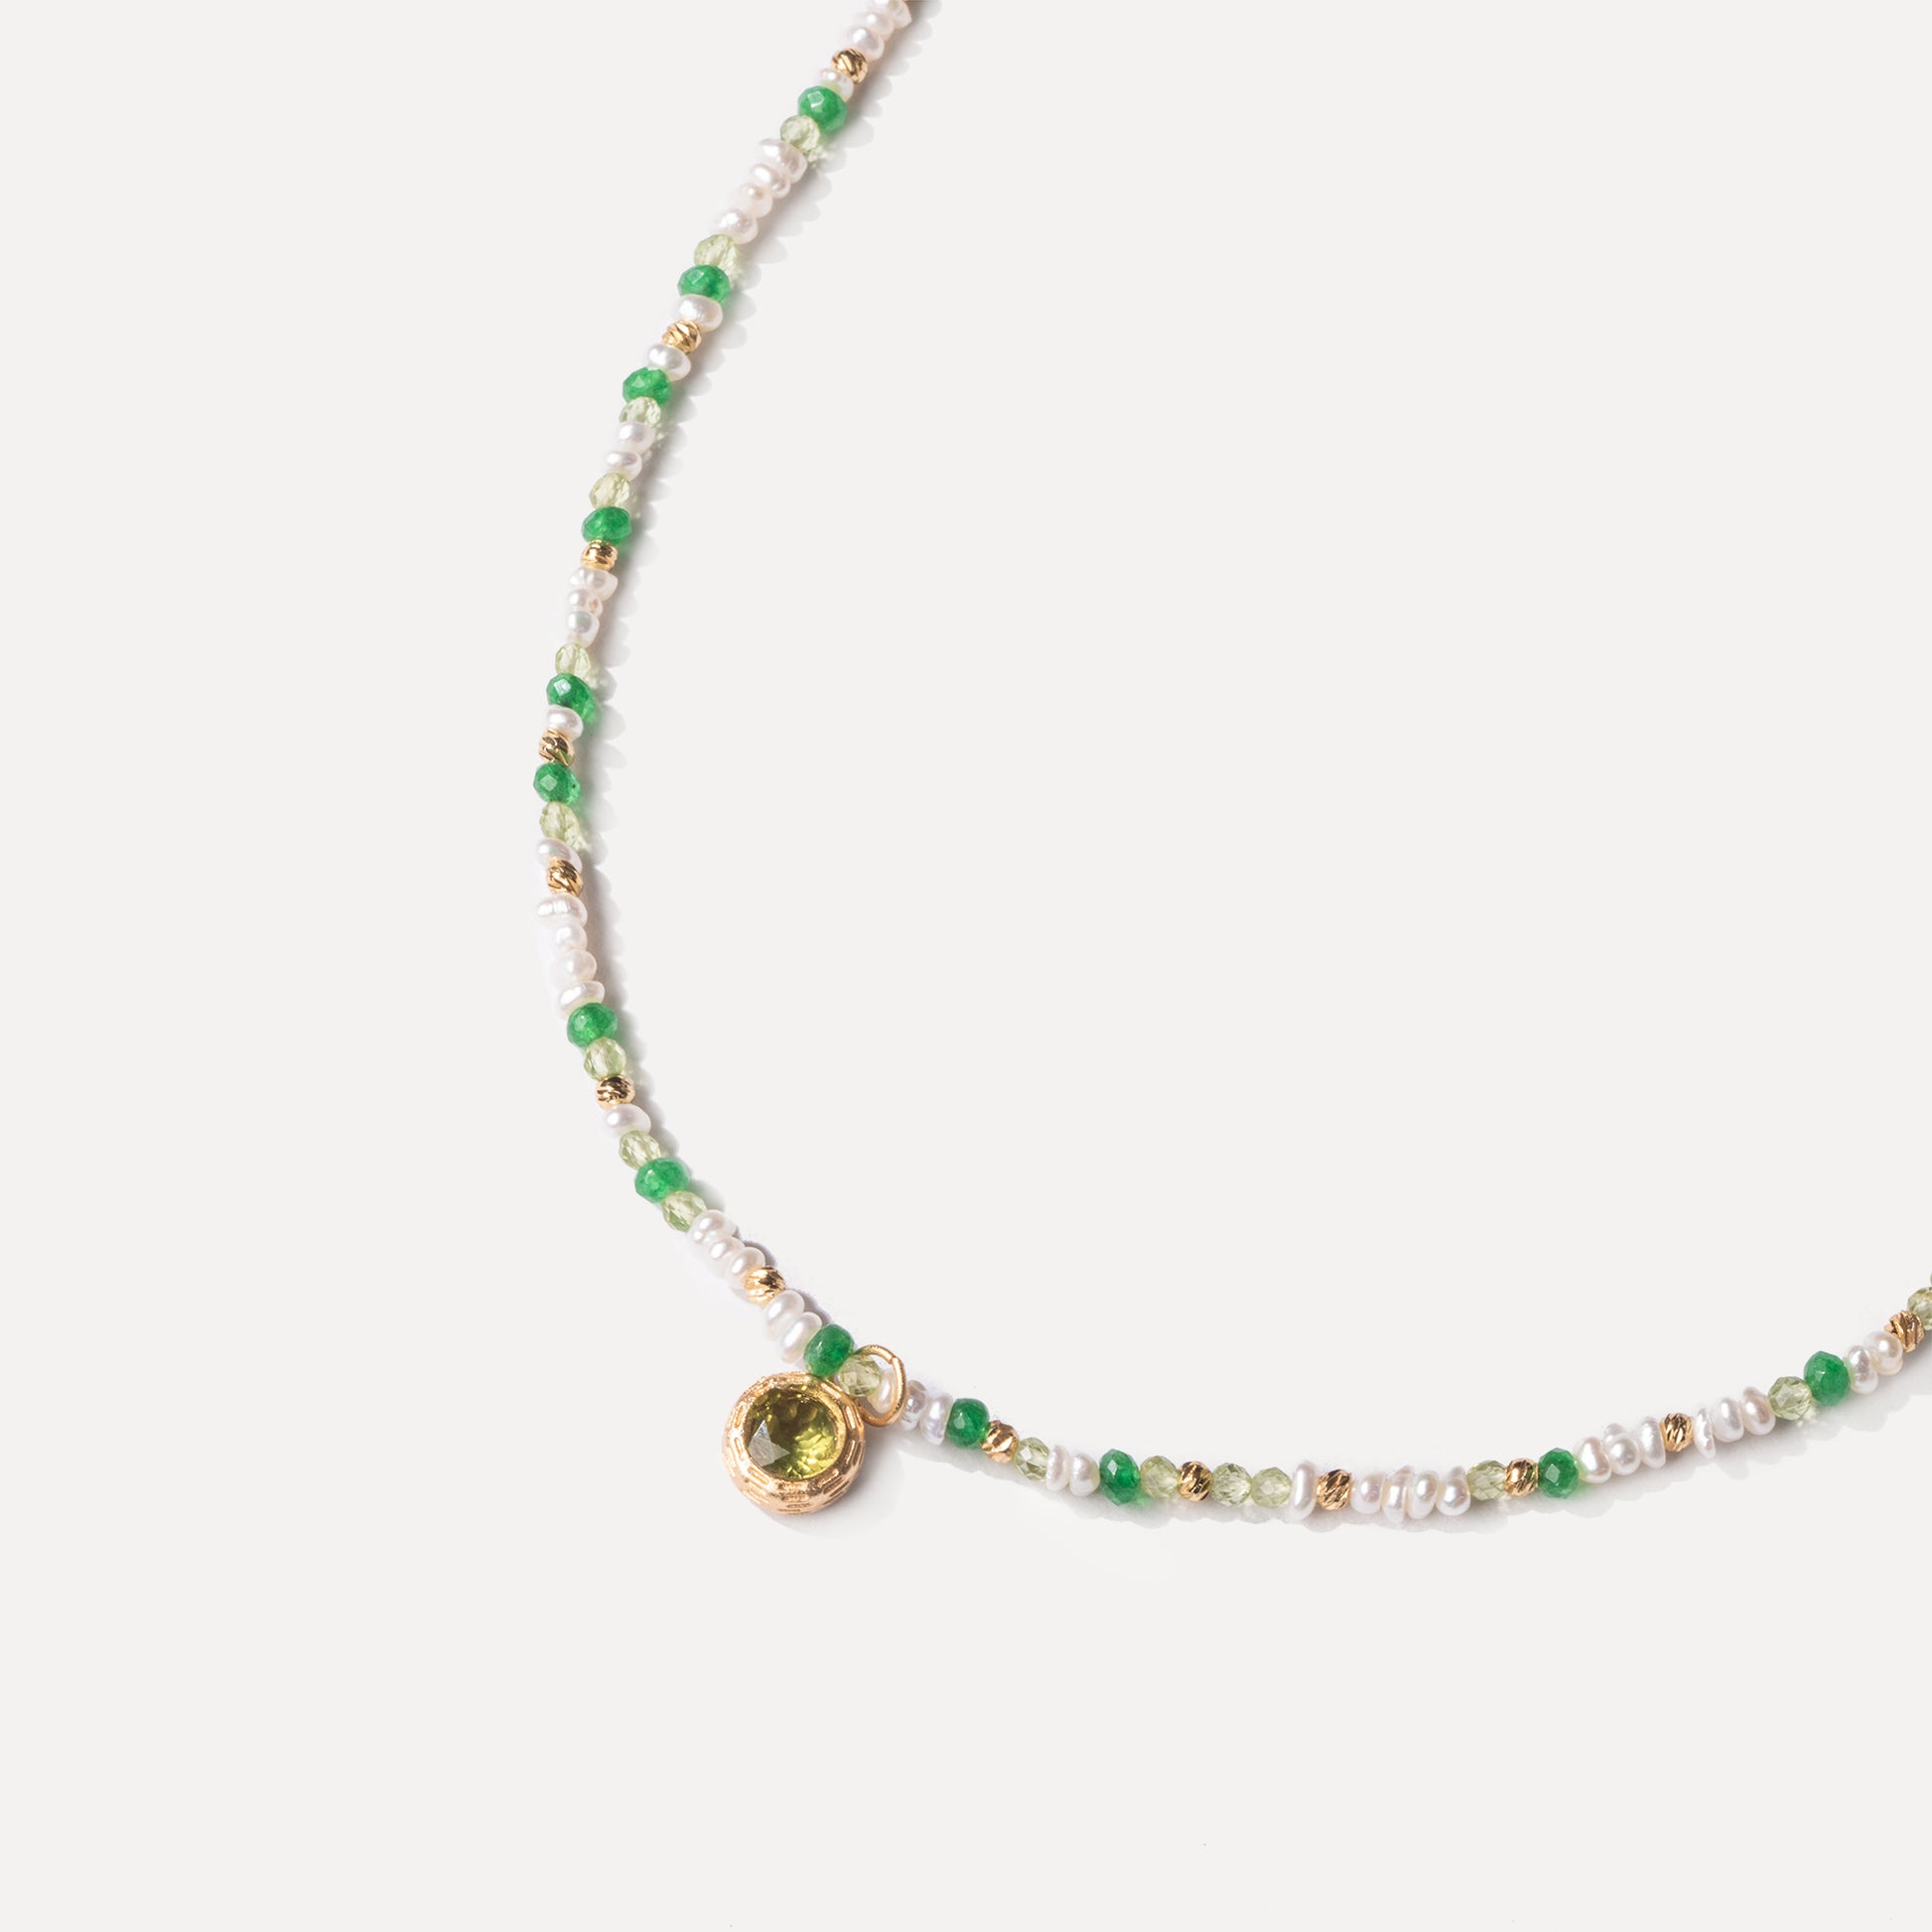 The Wizard of Oz Beaded Necklace (Peridot and Keshi Pearl)